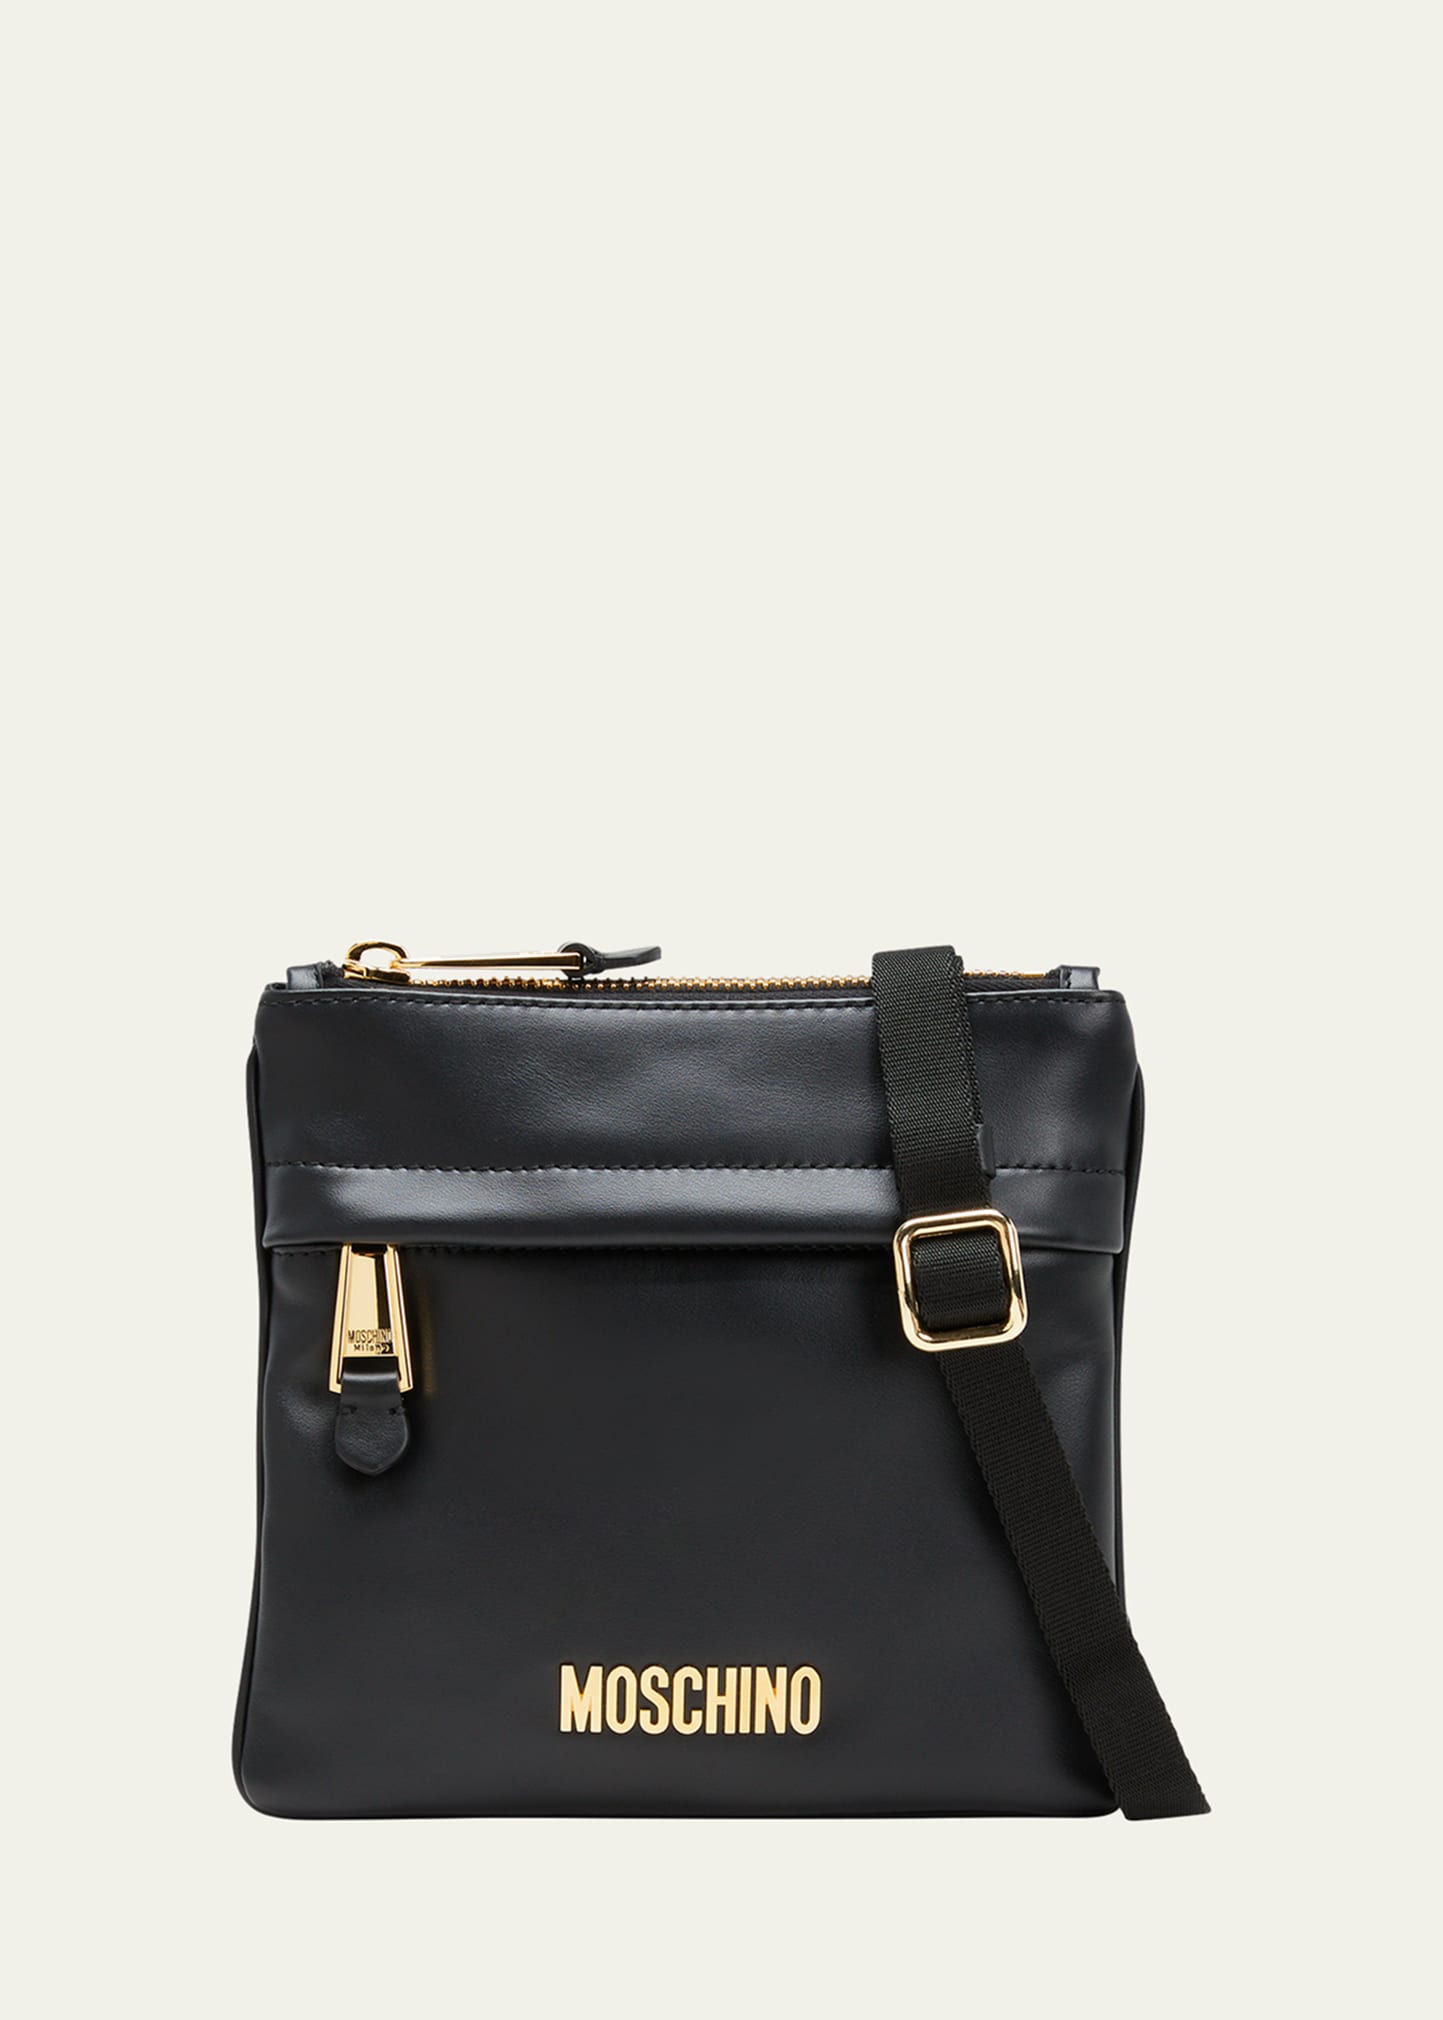 MOSCHINO MEN'S LEATHER CROSSBODY BAG WITH METAL LOGO